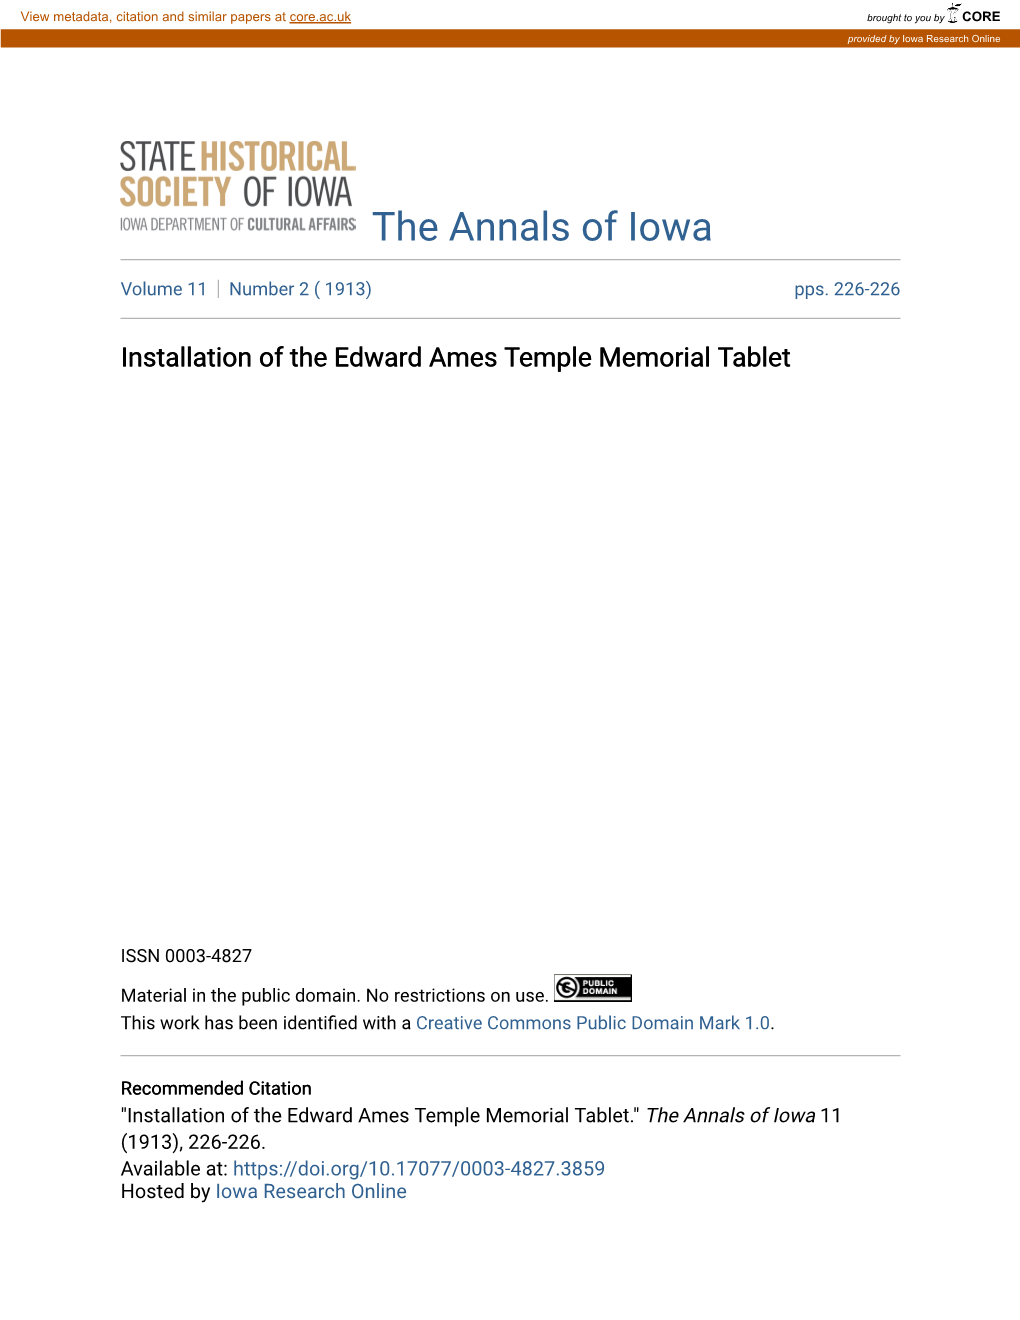 Installation of the Edward Ames Temple Memorial Tablet